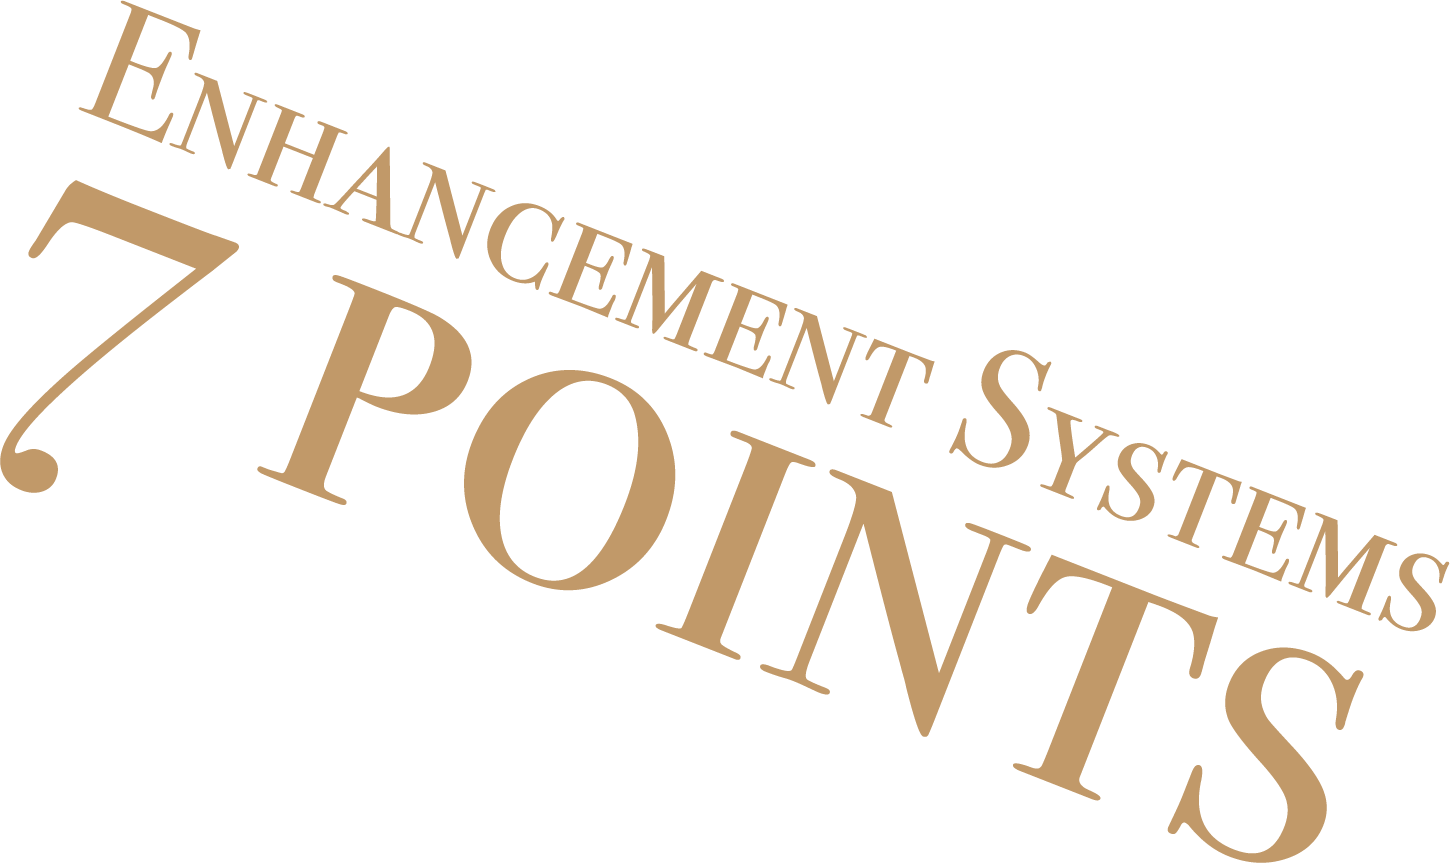 ENHANCEMENT SYSTEMS 7POINTS